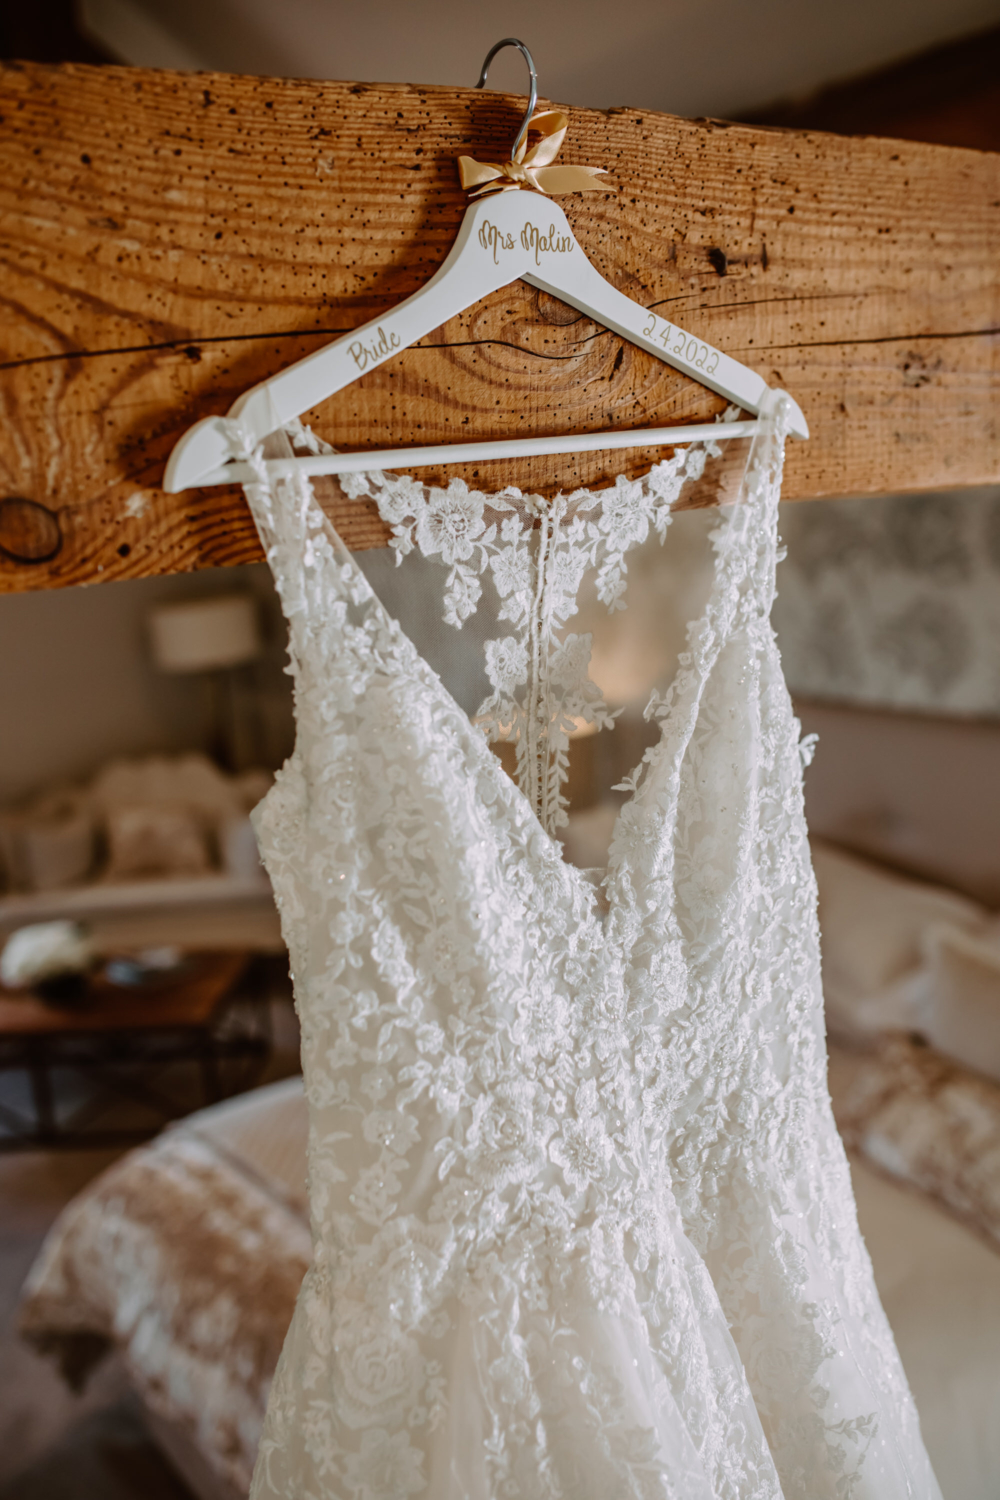 Detailed photo of hanger with bride's dress 